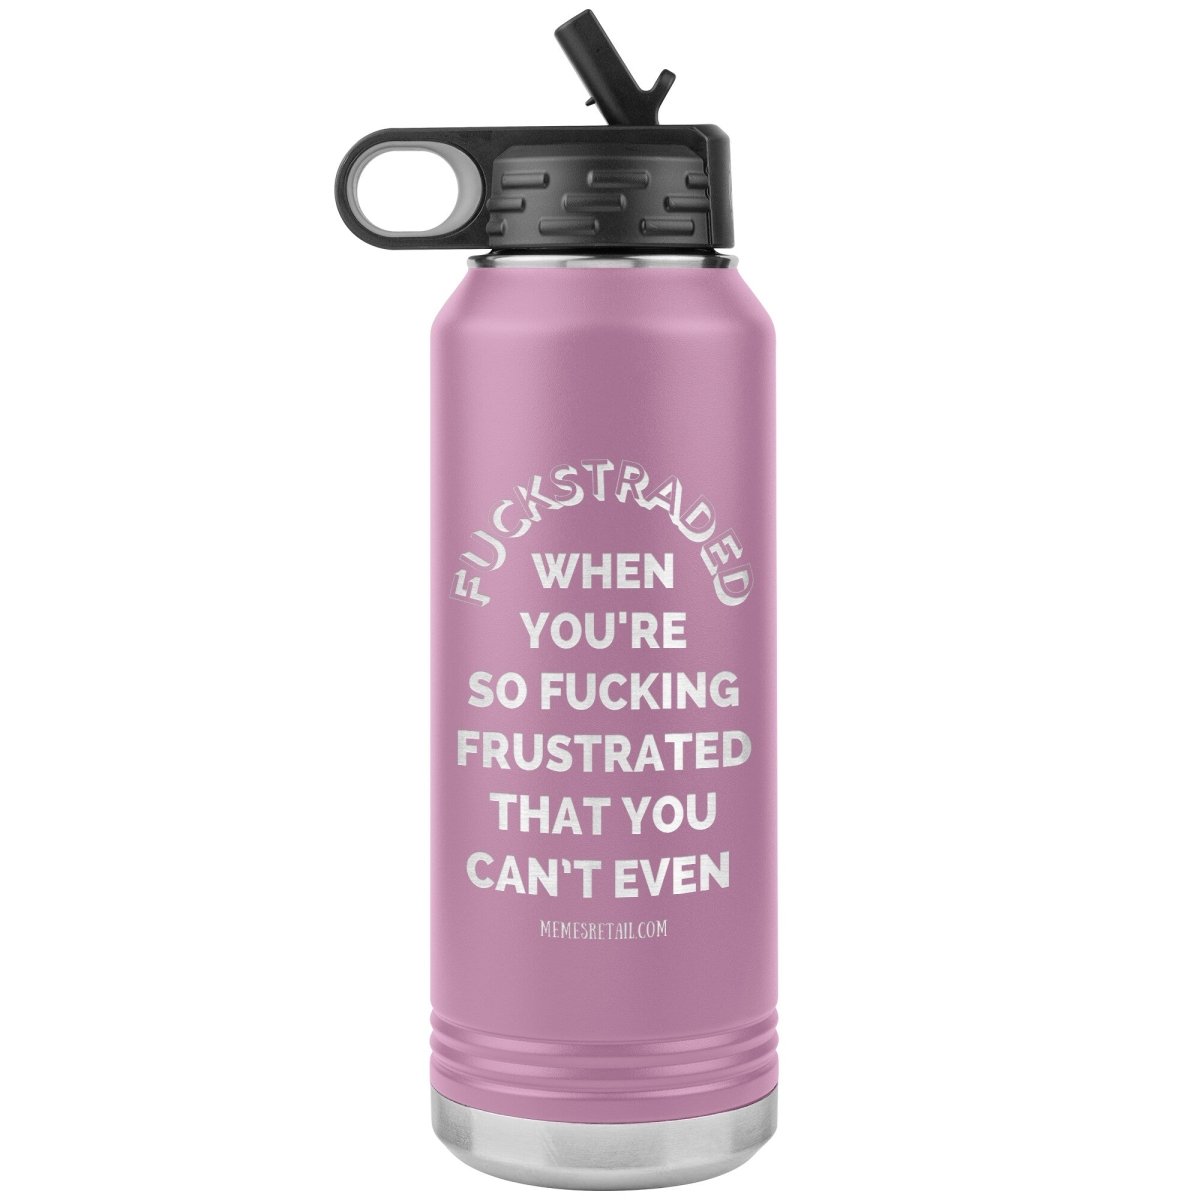 Fuckstraded, When You're So Fucking Frustrated That You Can’t Even - 32oz Water Tumblers, Light Purple - MemesRetail.com